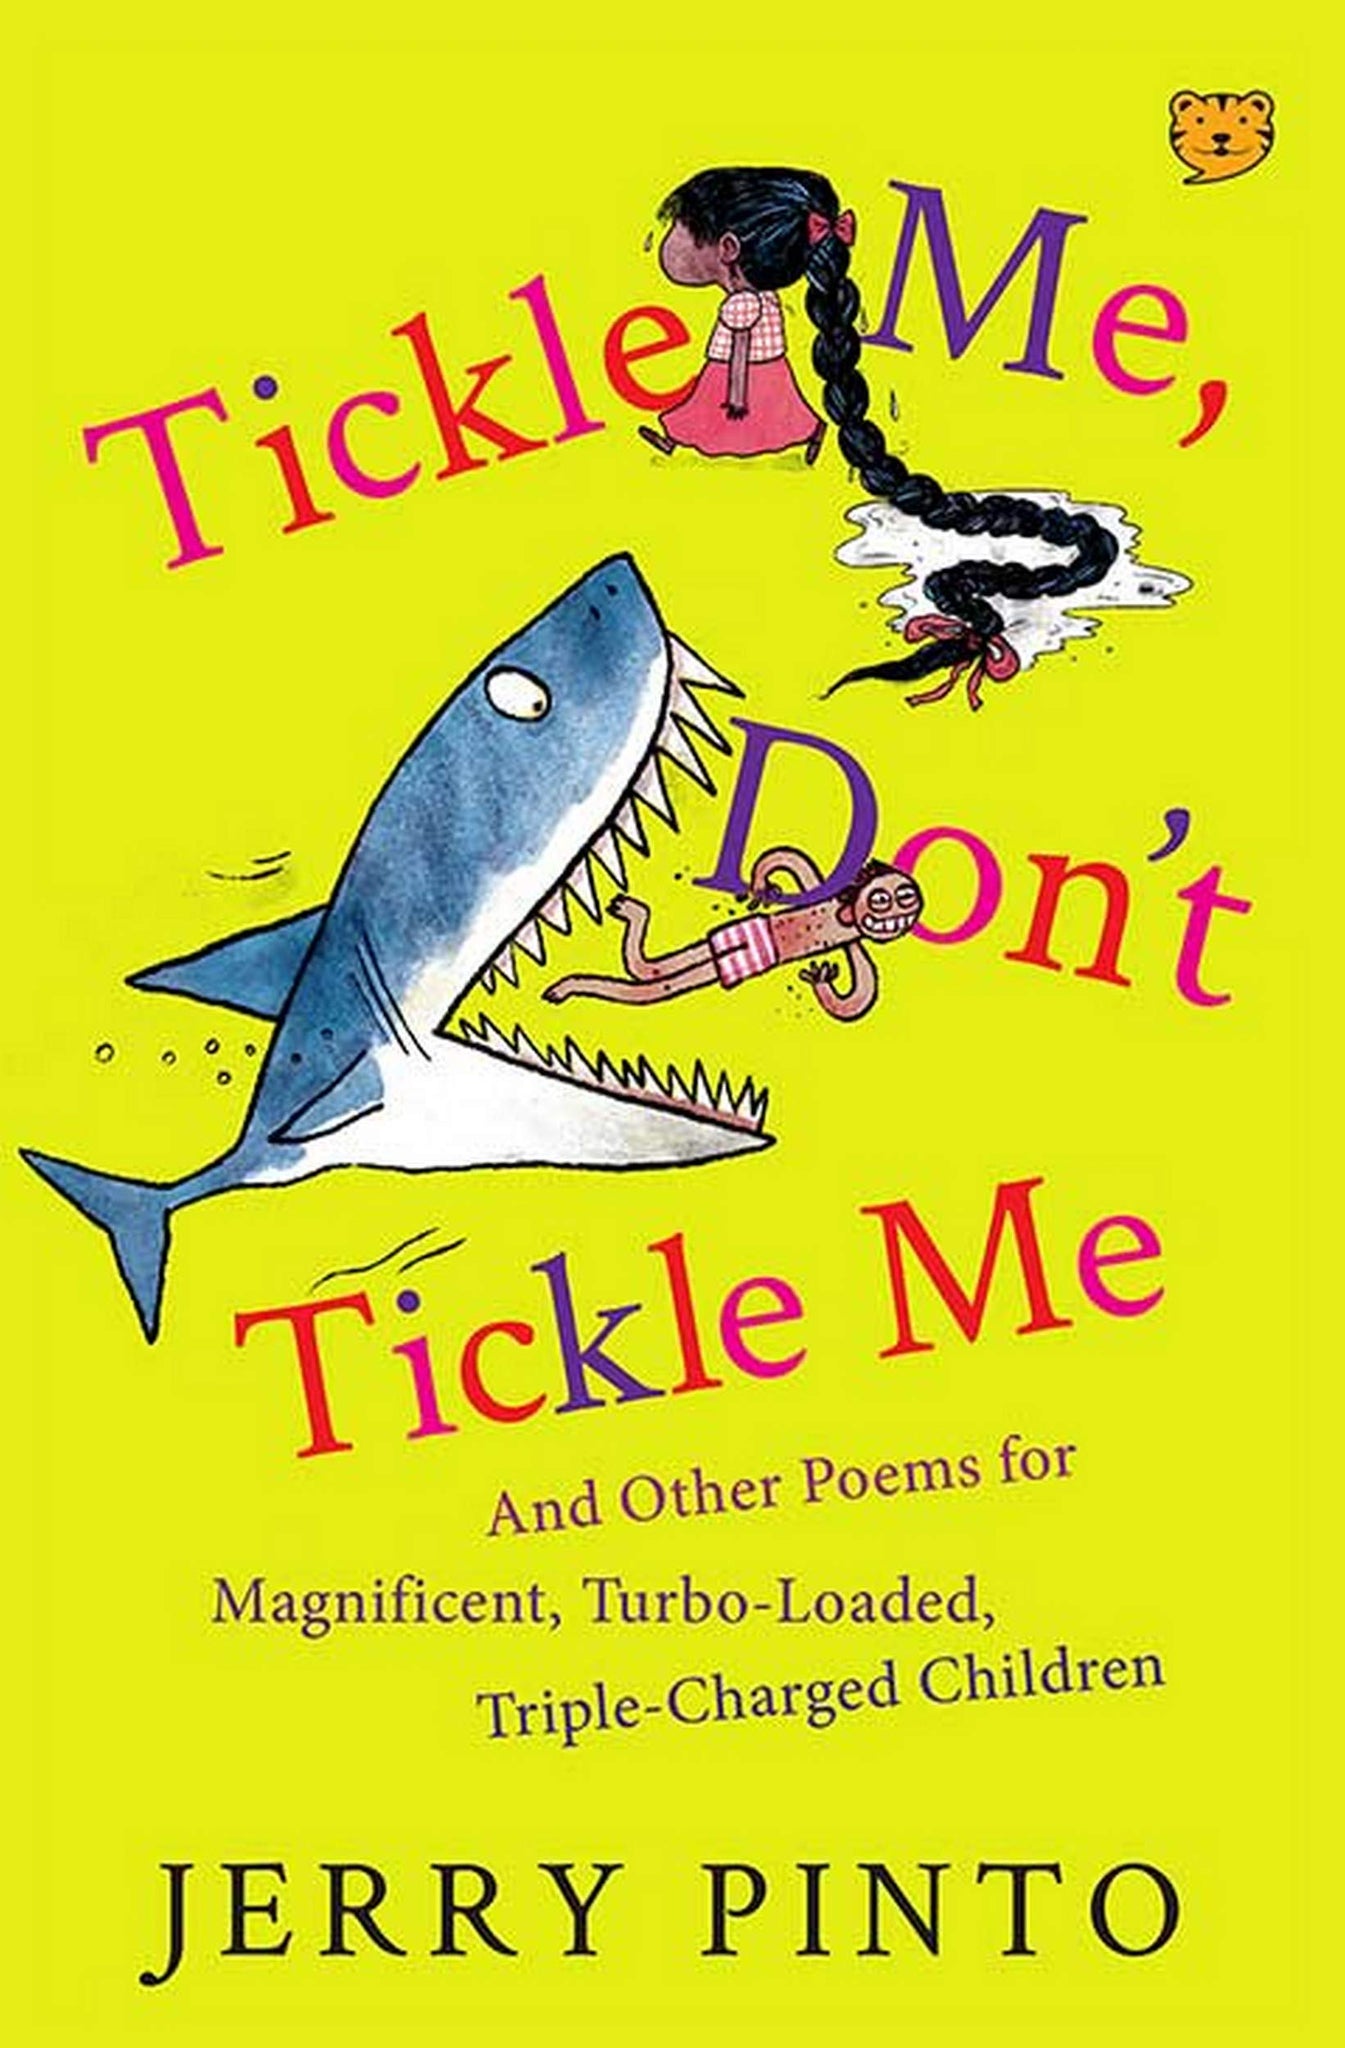 Tickle Me, Don't Tickle Me: And Other Poems for Magnificent, Turbo-Loaded, Triple-Charged Children